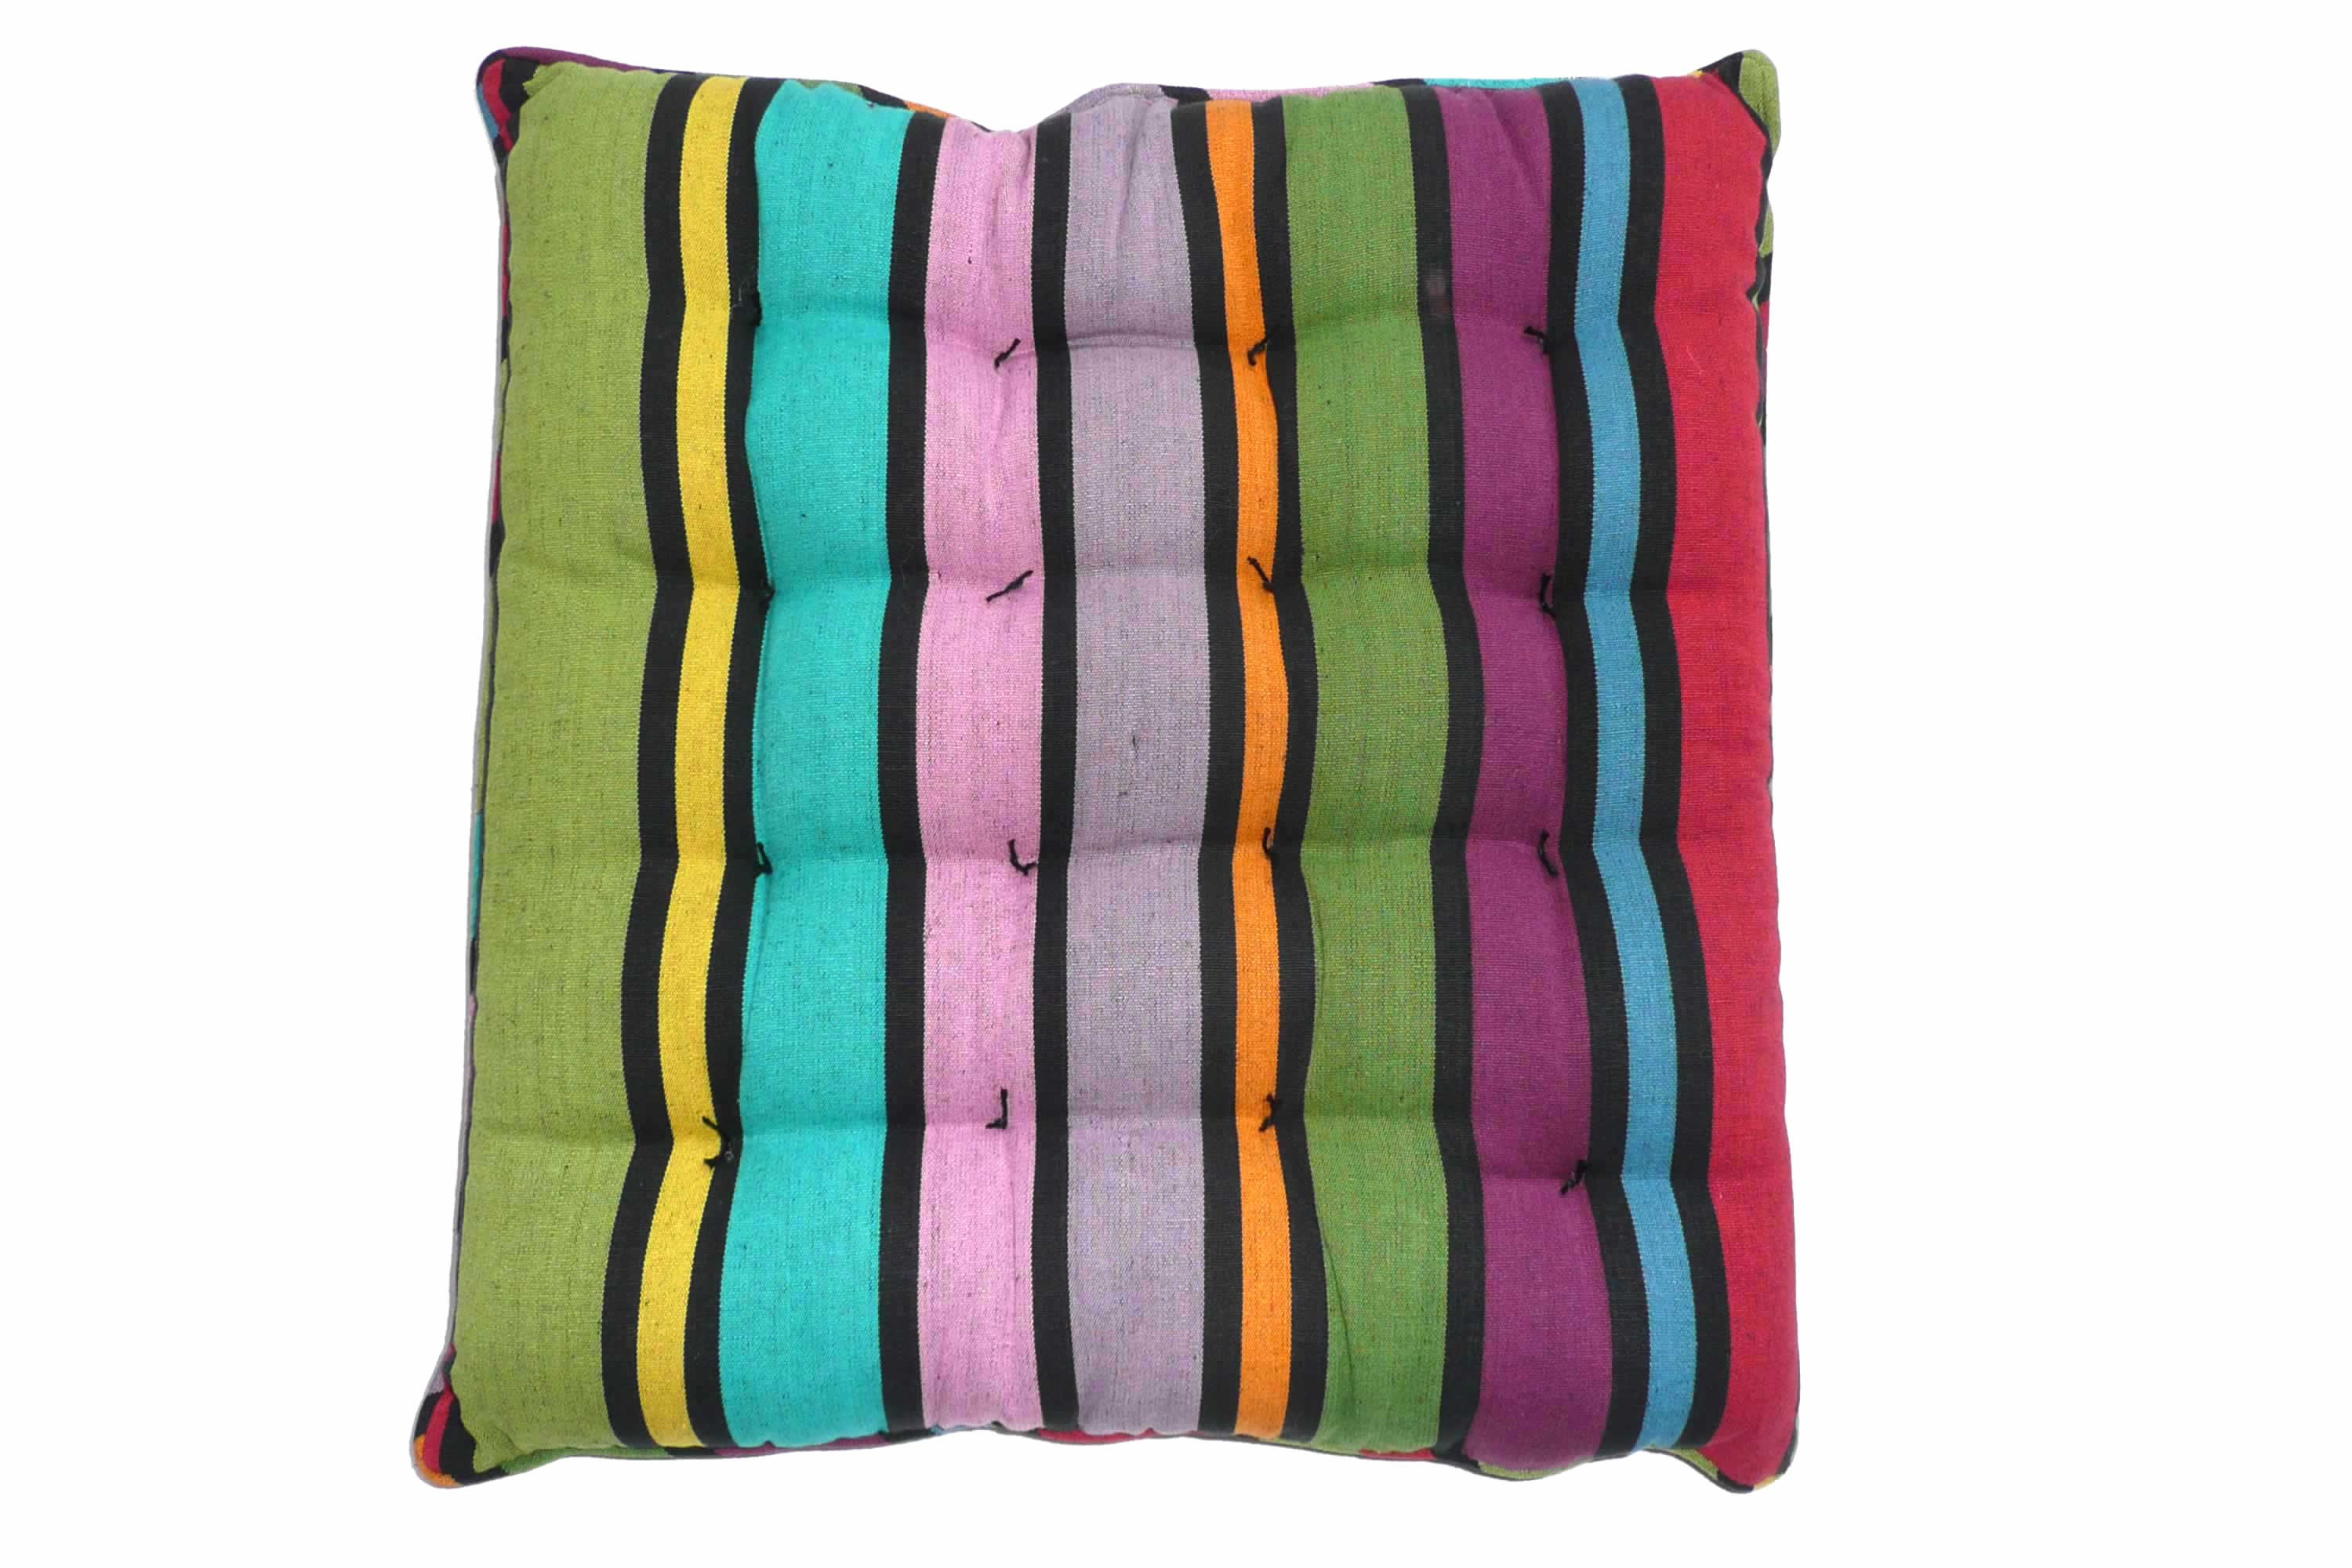 Piped Seat Pads in Bold Rainbow Stripes